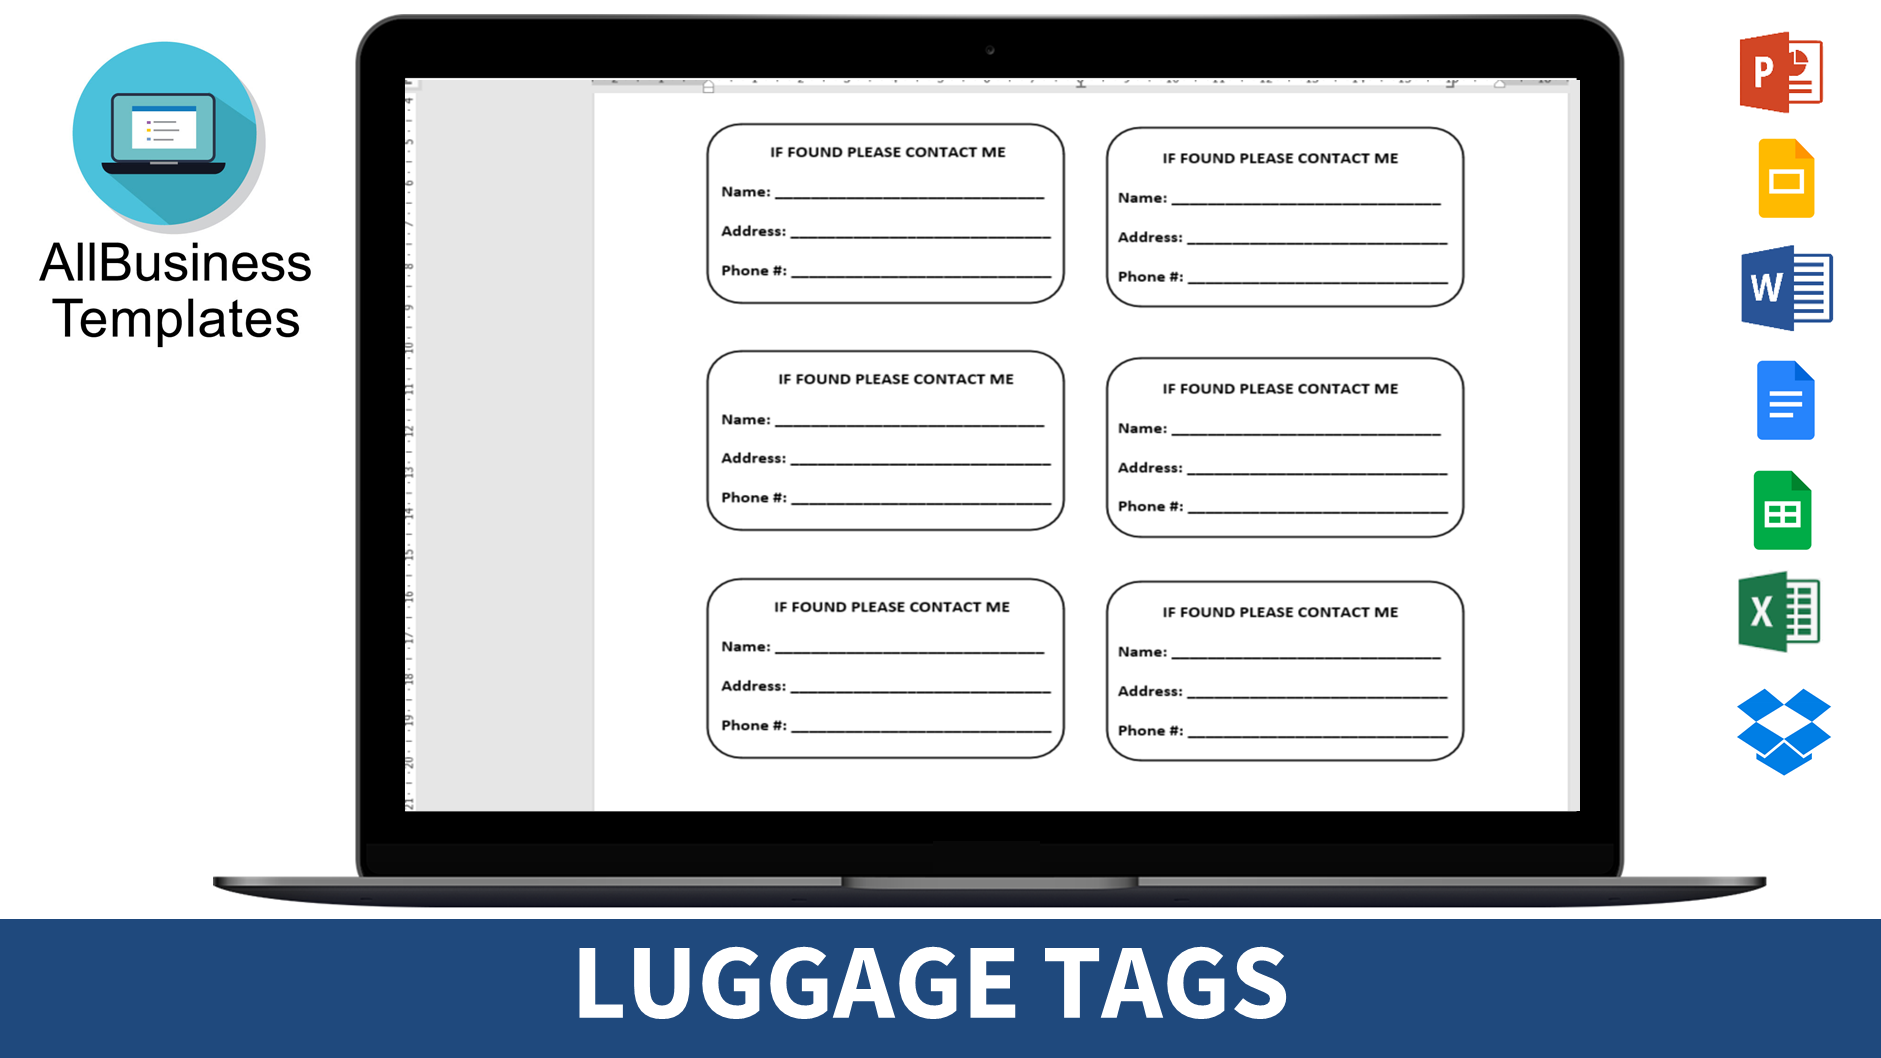 Free Printable Luggage Tags  Templates at allbusinesstemplates.com Throughout Blank Luggage Tag Template